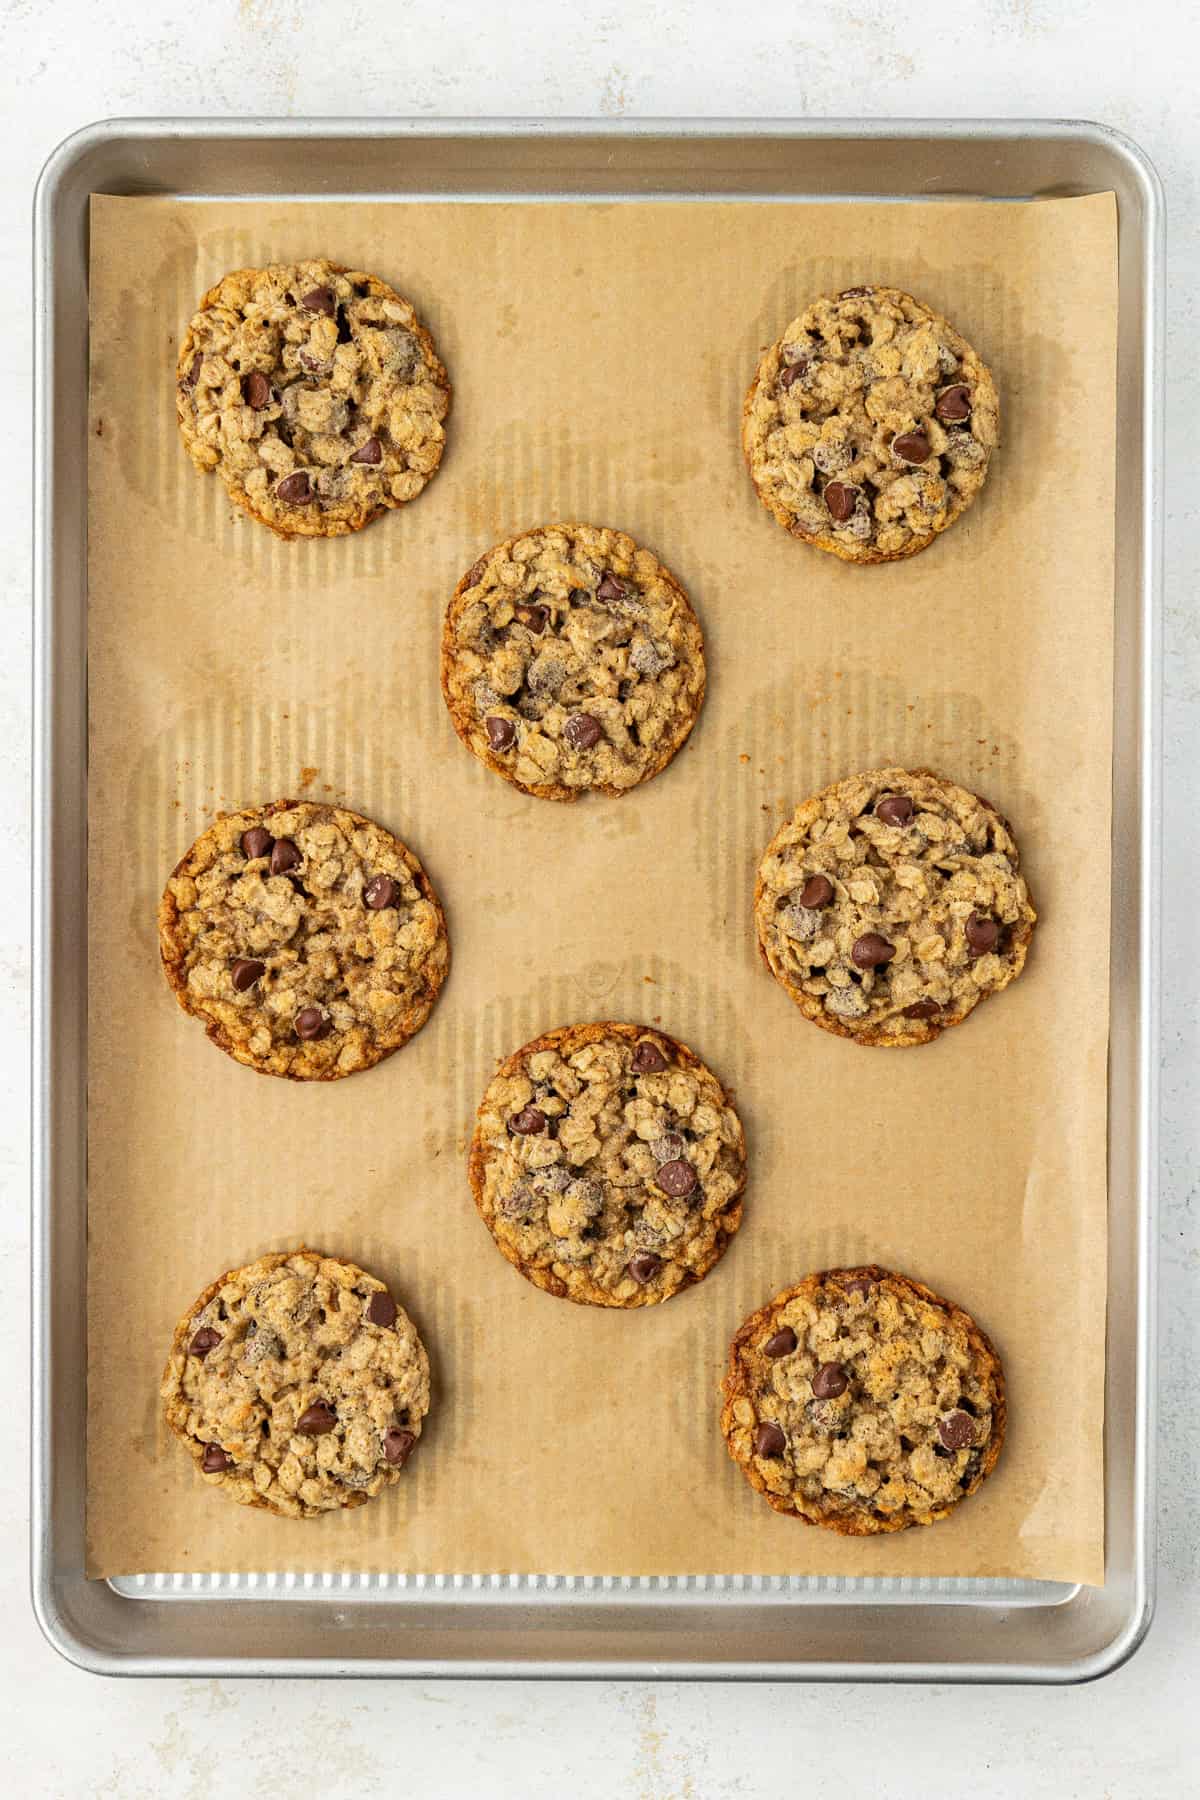 over head view of chocolate chip oatmeal cookies baked on a baking sheet lined with brown parchment paper